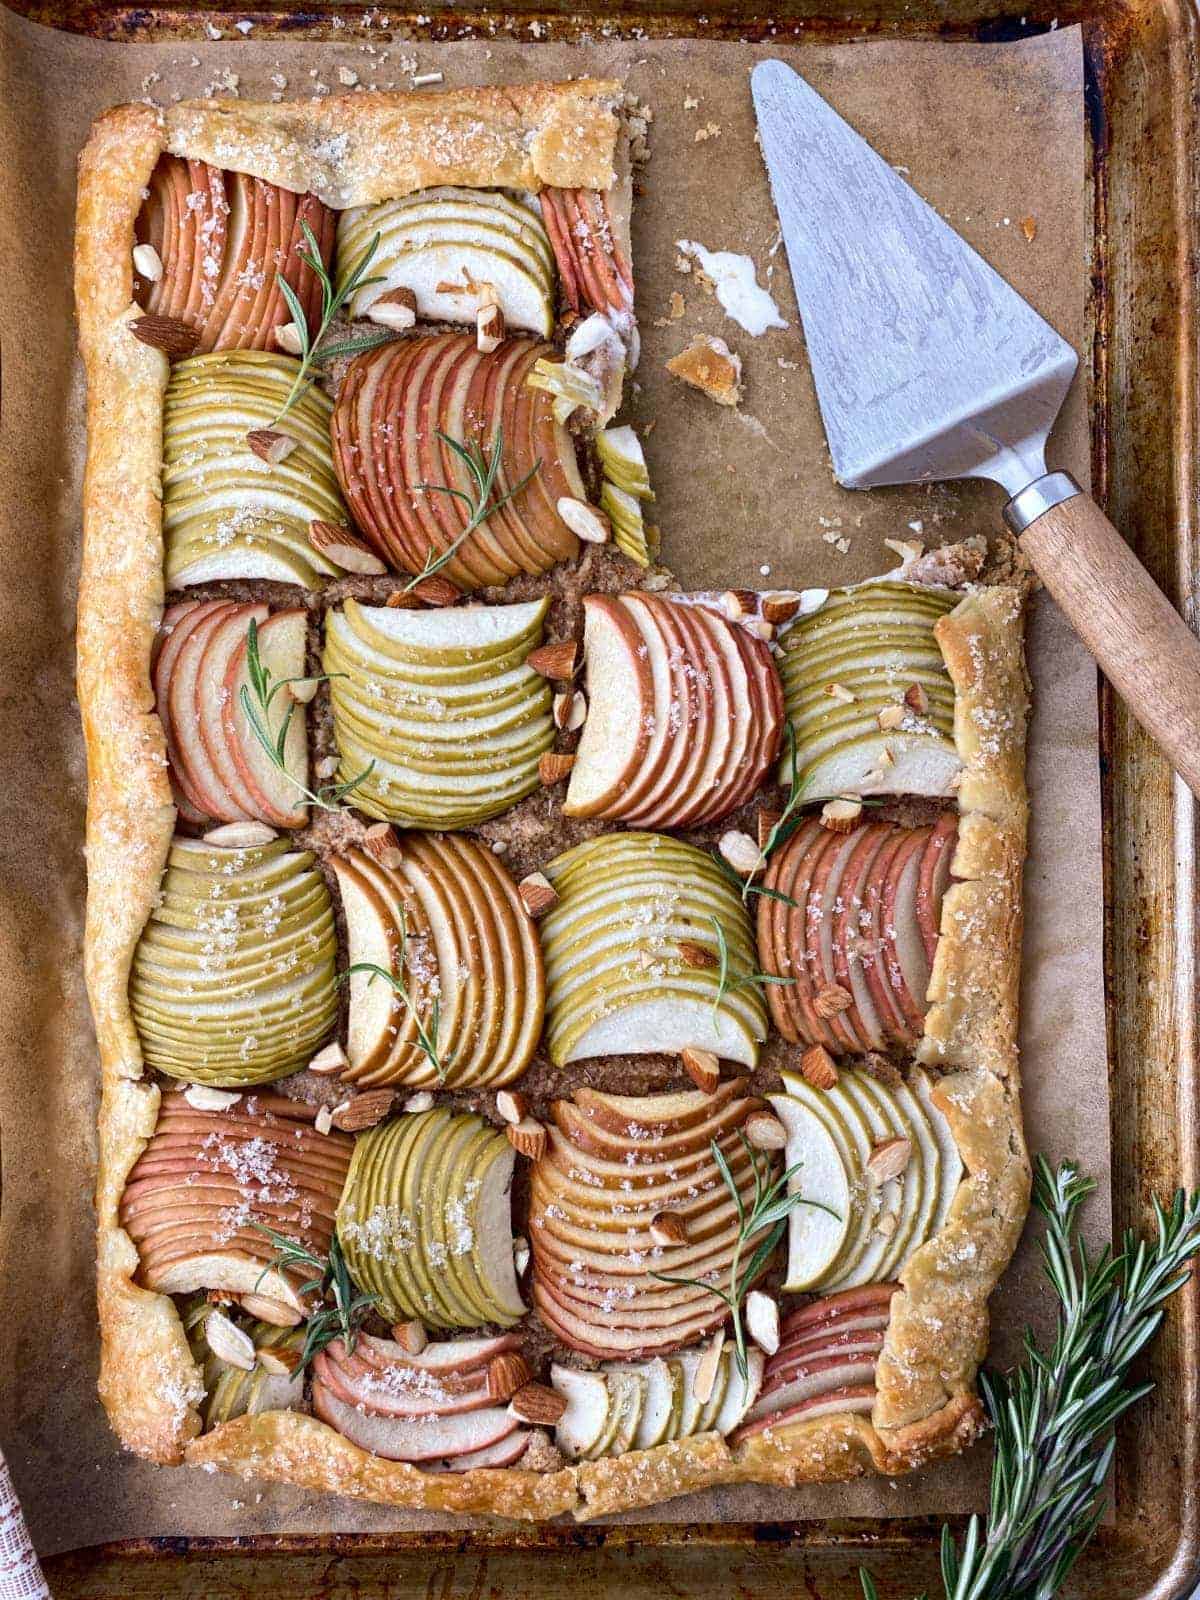 Rosemary Almond Apple Galette on a baking sheet with a slice missing